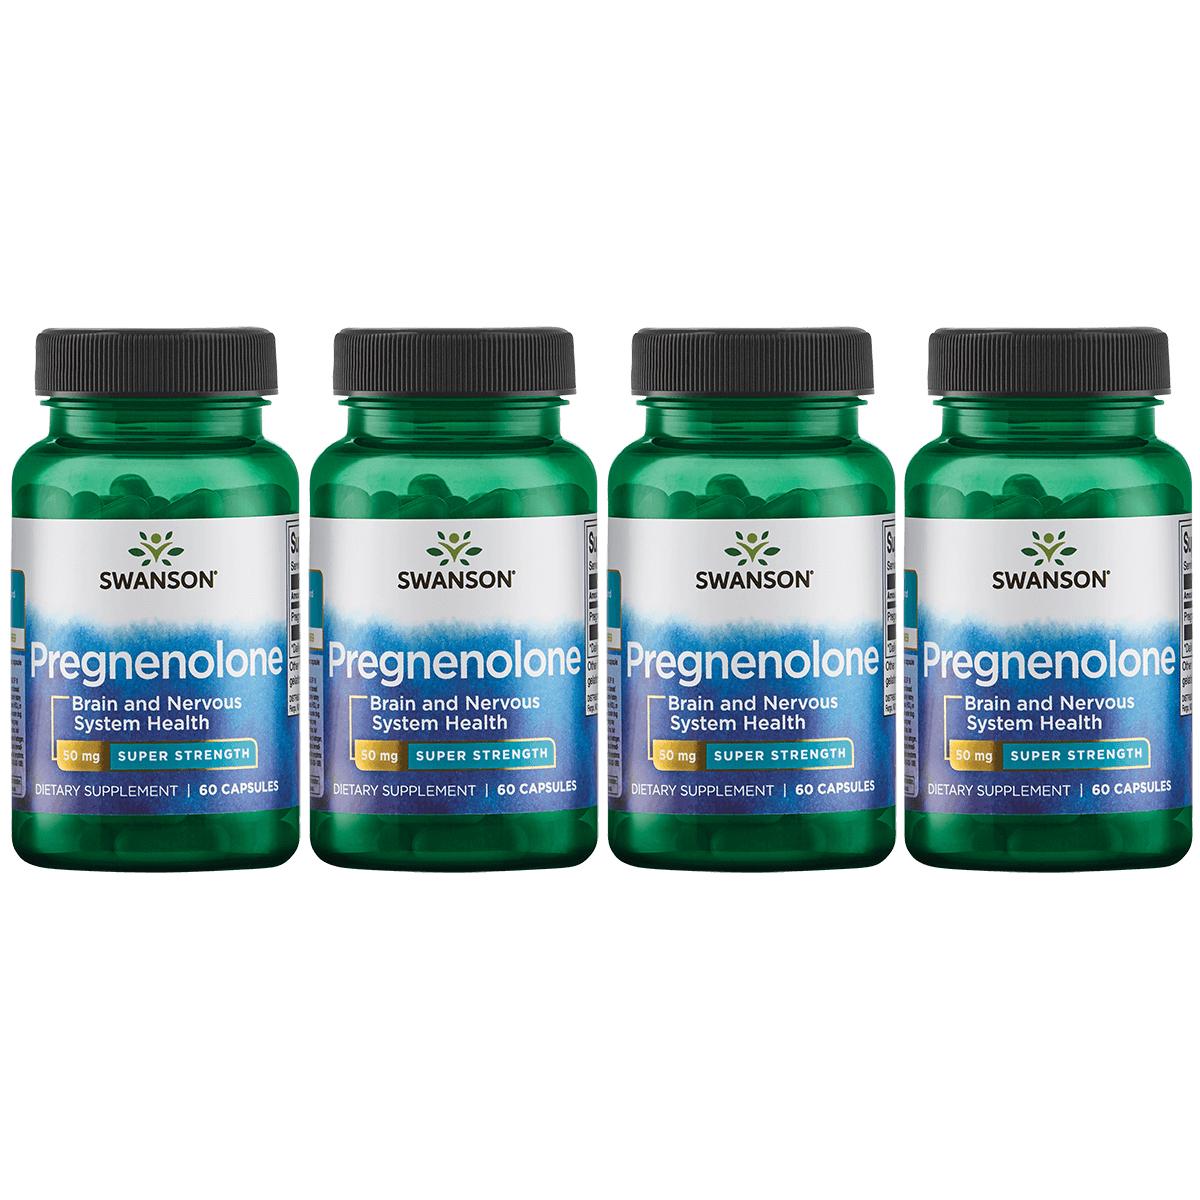 Swanson Ultra Pregnenolone - Super Strength 4 Pack Supplement Vitamin 50 mg 60 Caps